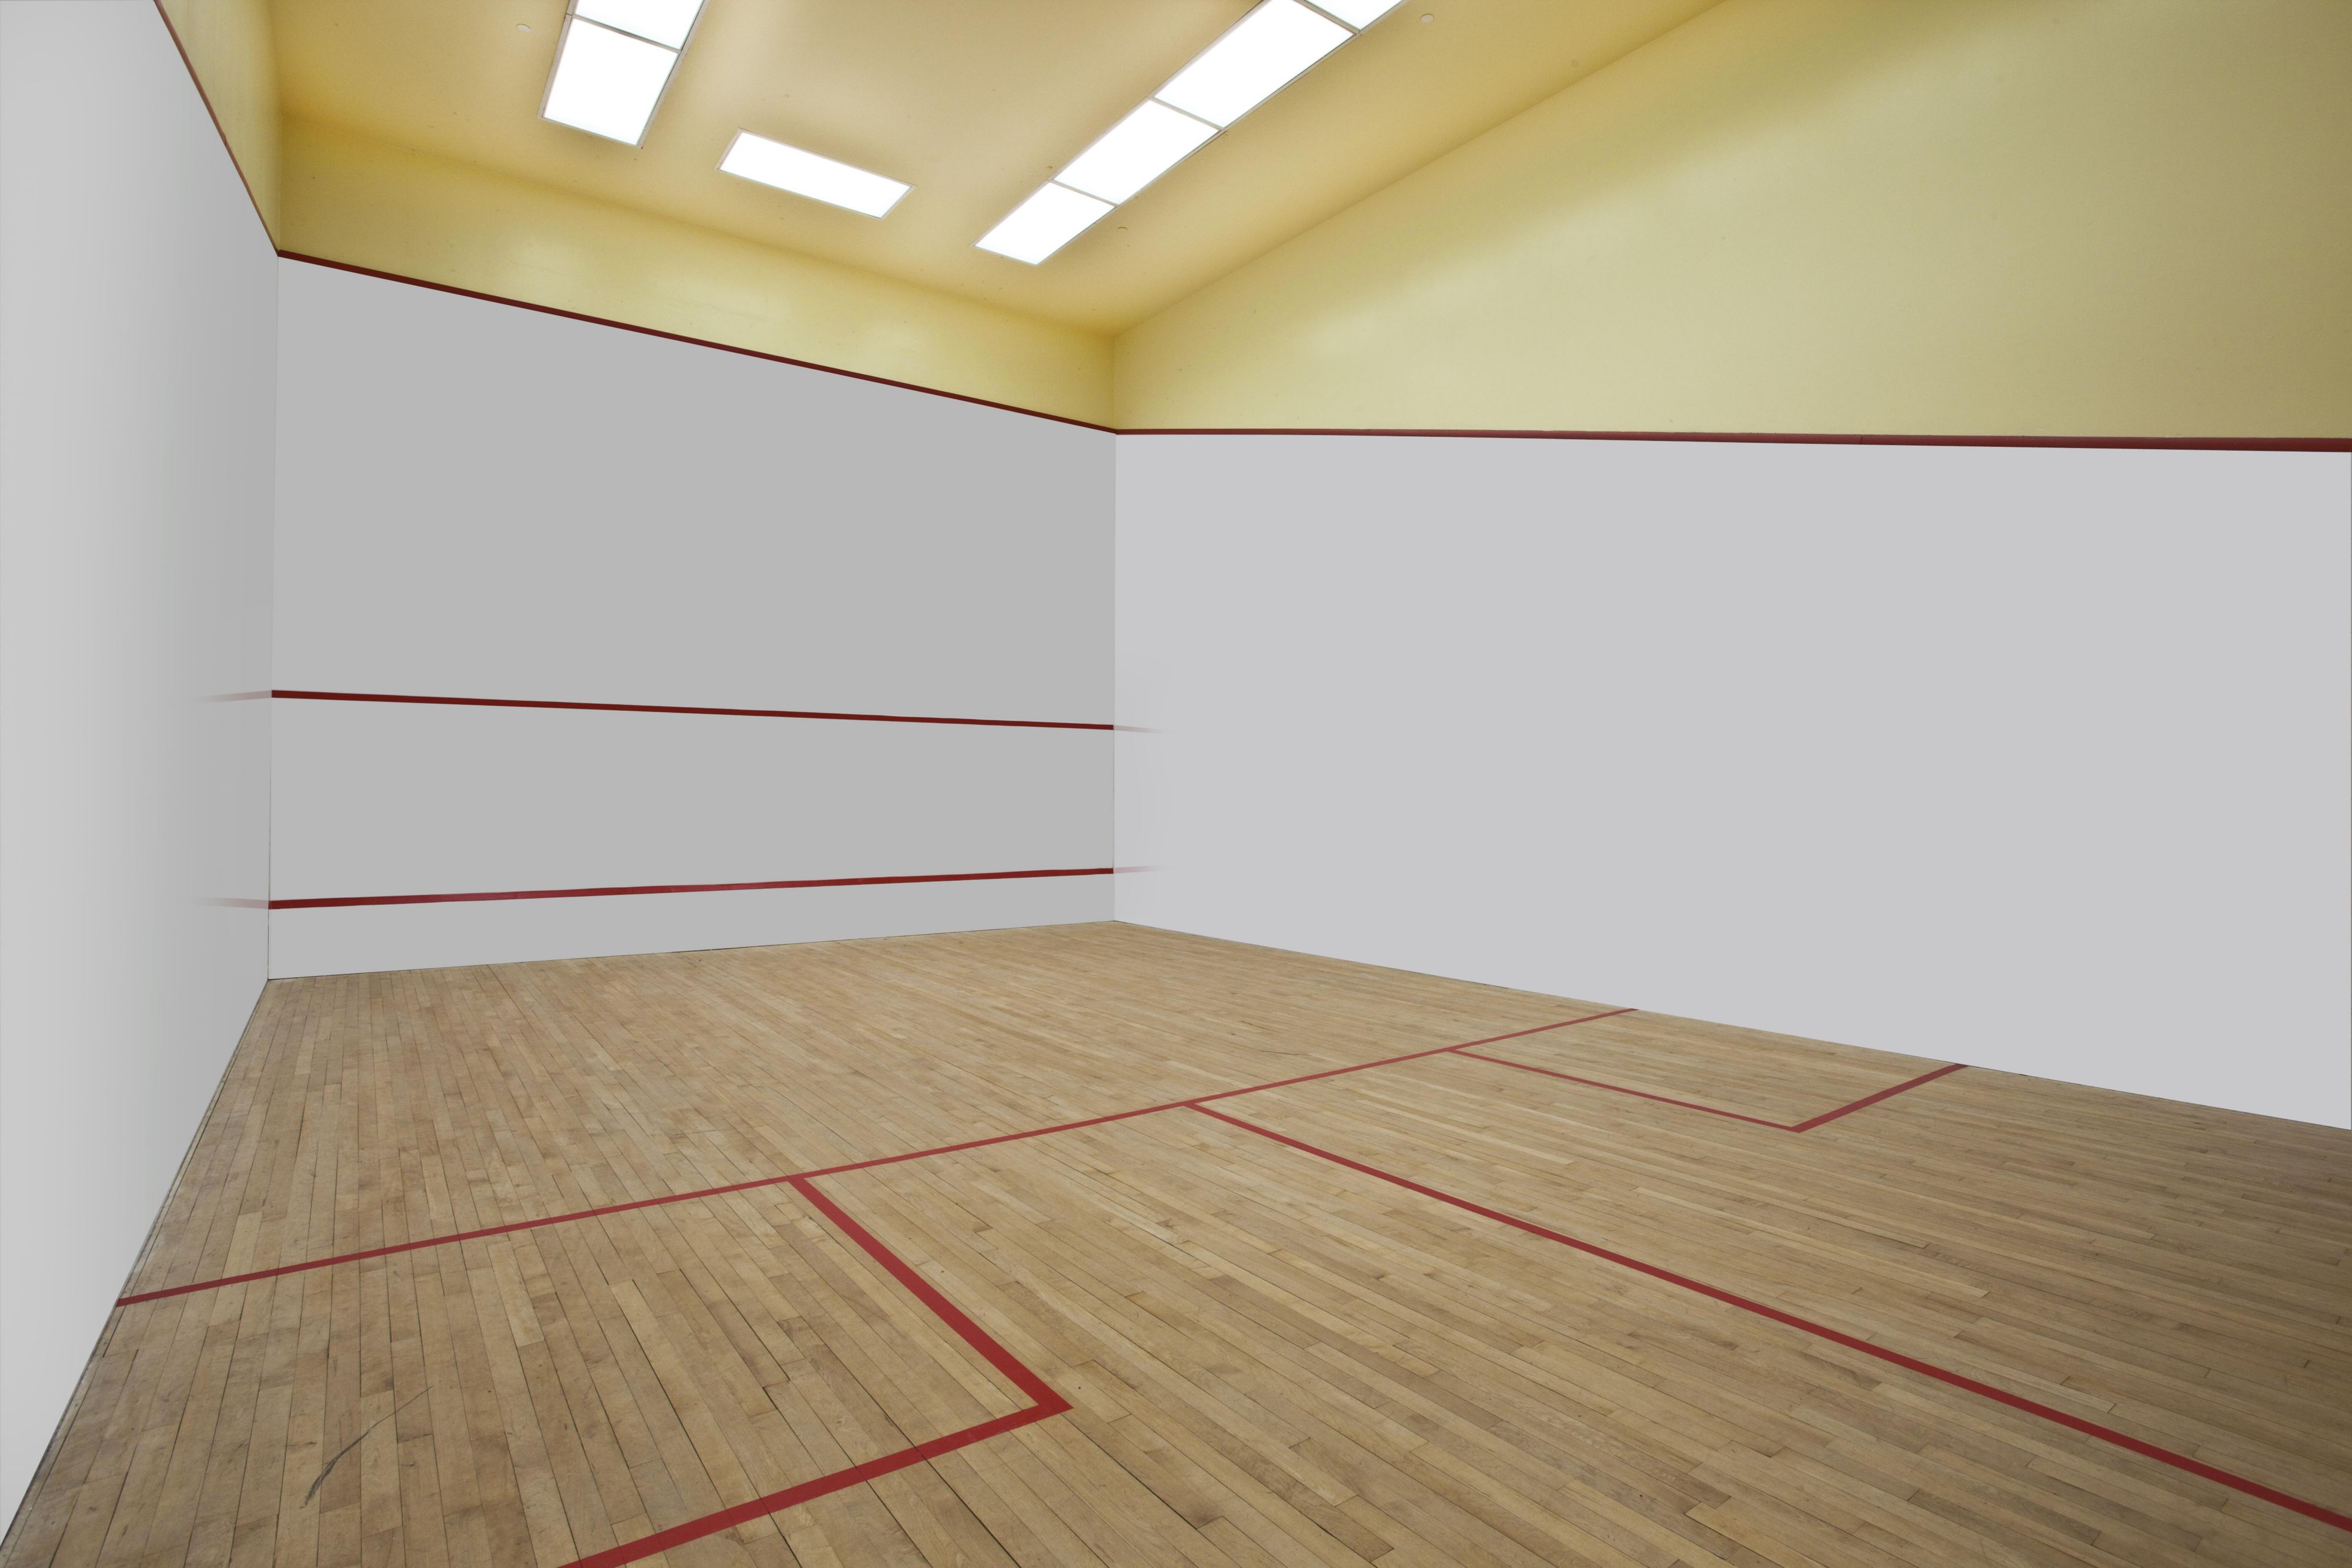 Enjoy a game of squash in our squash court